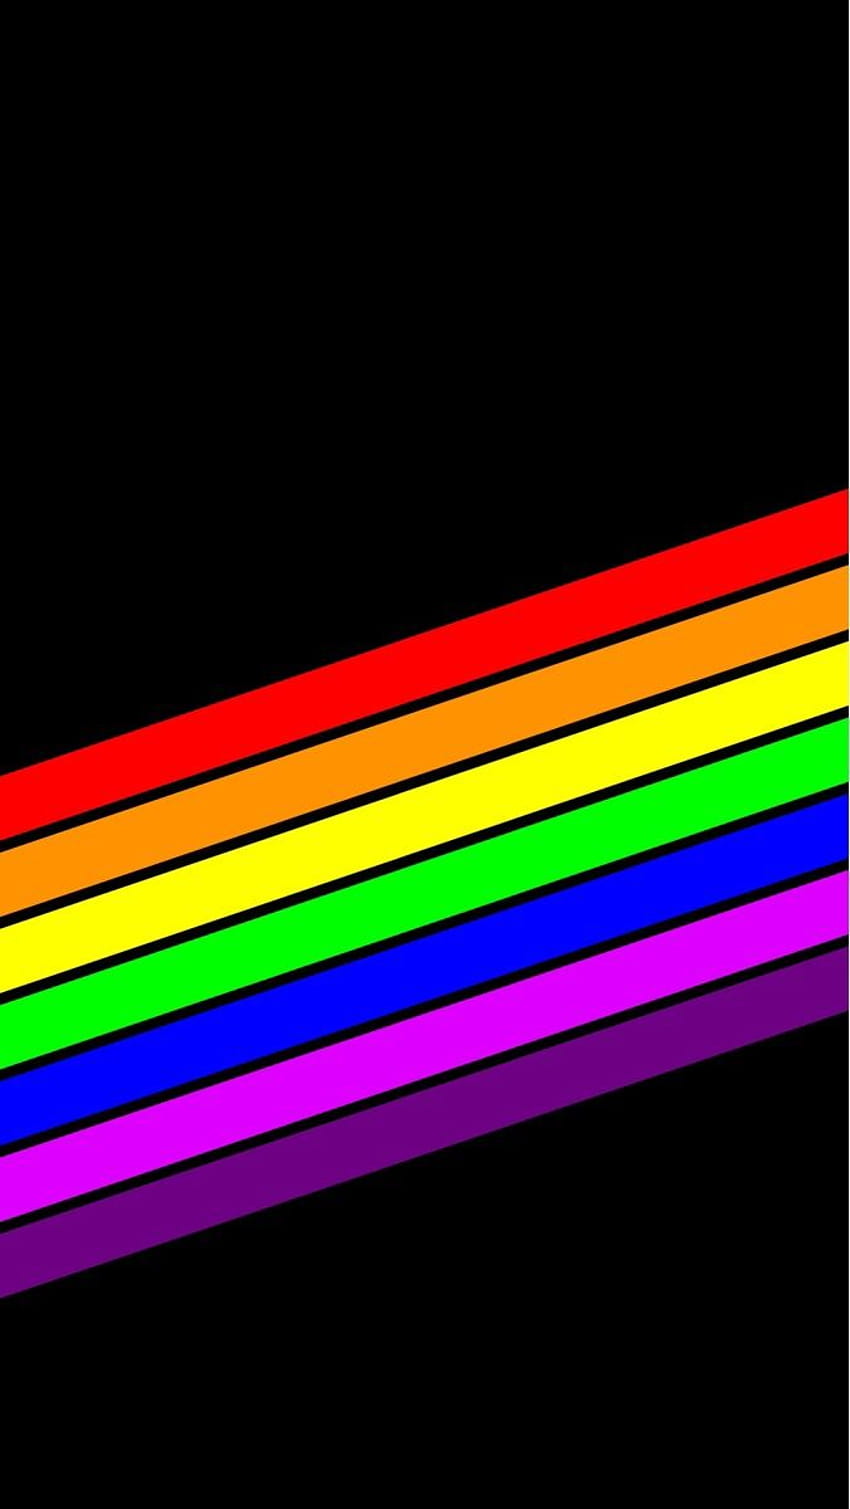 An iPhone 5/5S/5C, iPod touch pride backgrounds I made, I case, pride iphone HD phone wallpaper